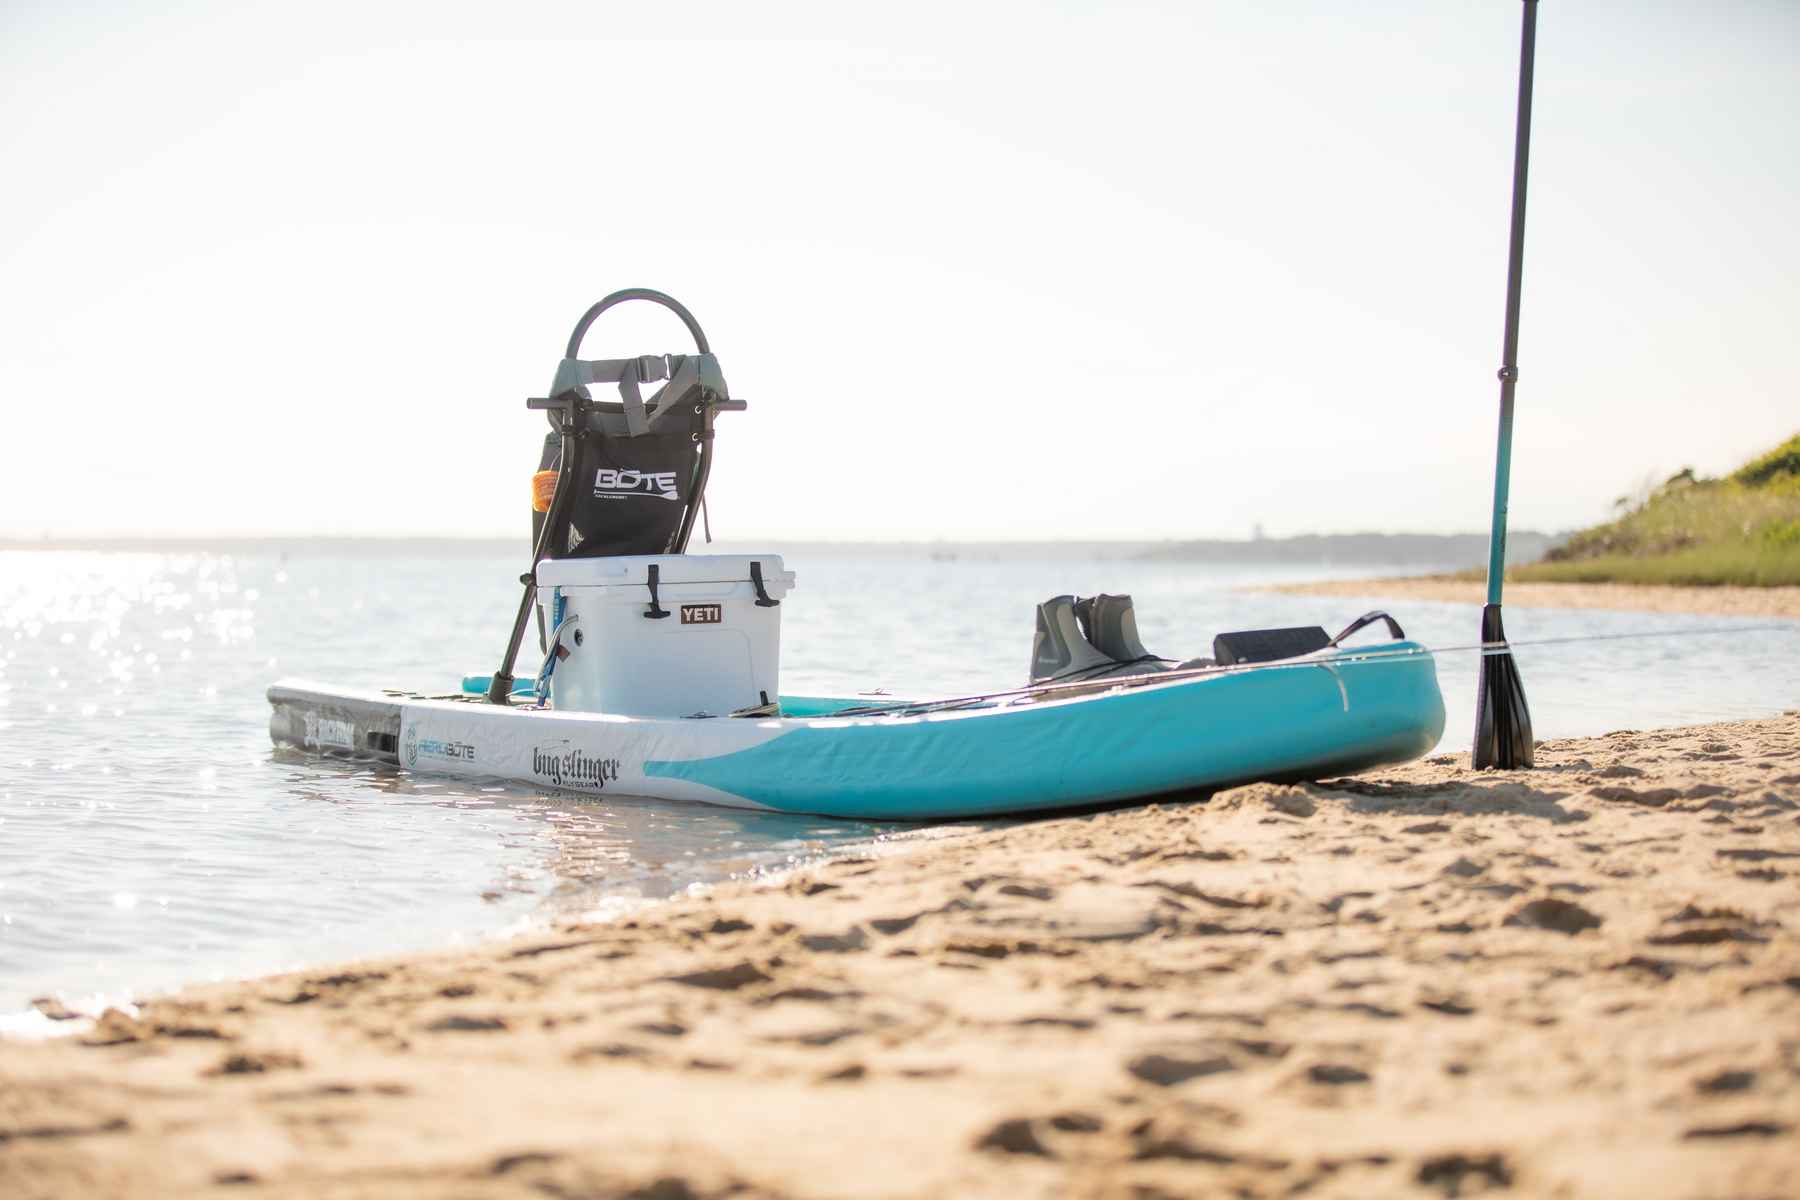 Inflatable float board boat (Belly) for fly fishing and fishing